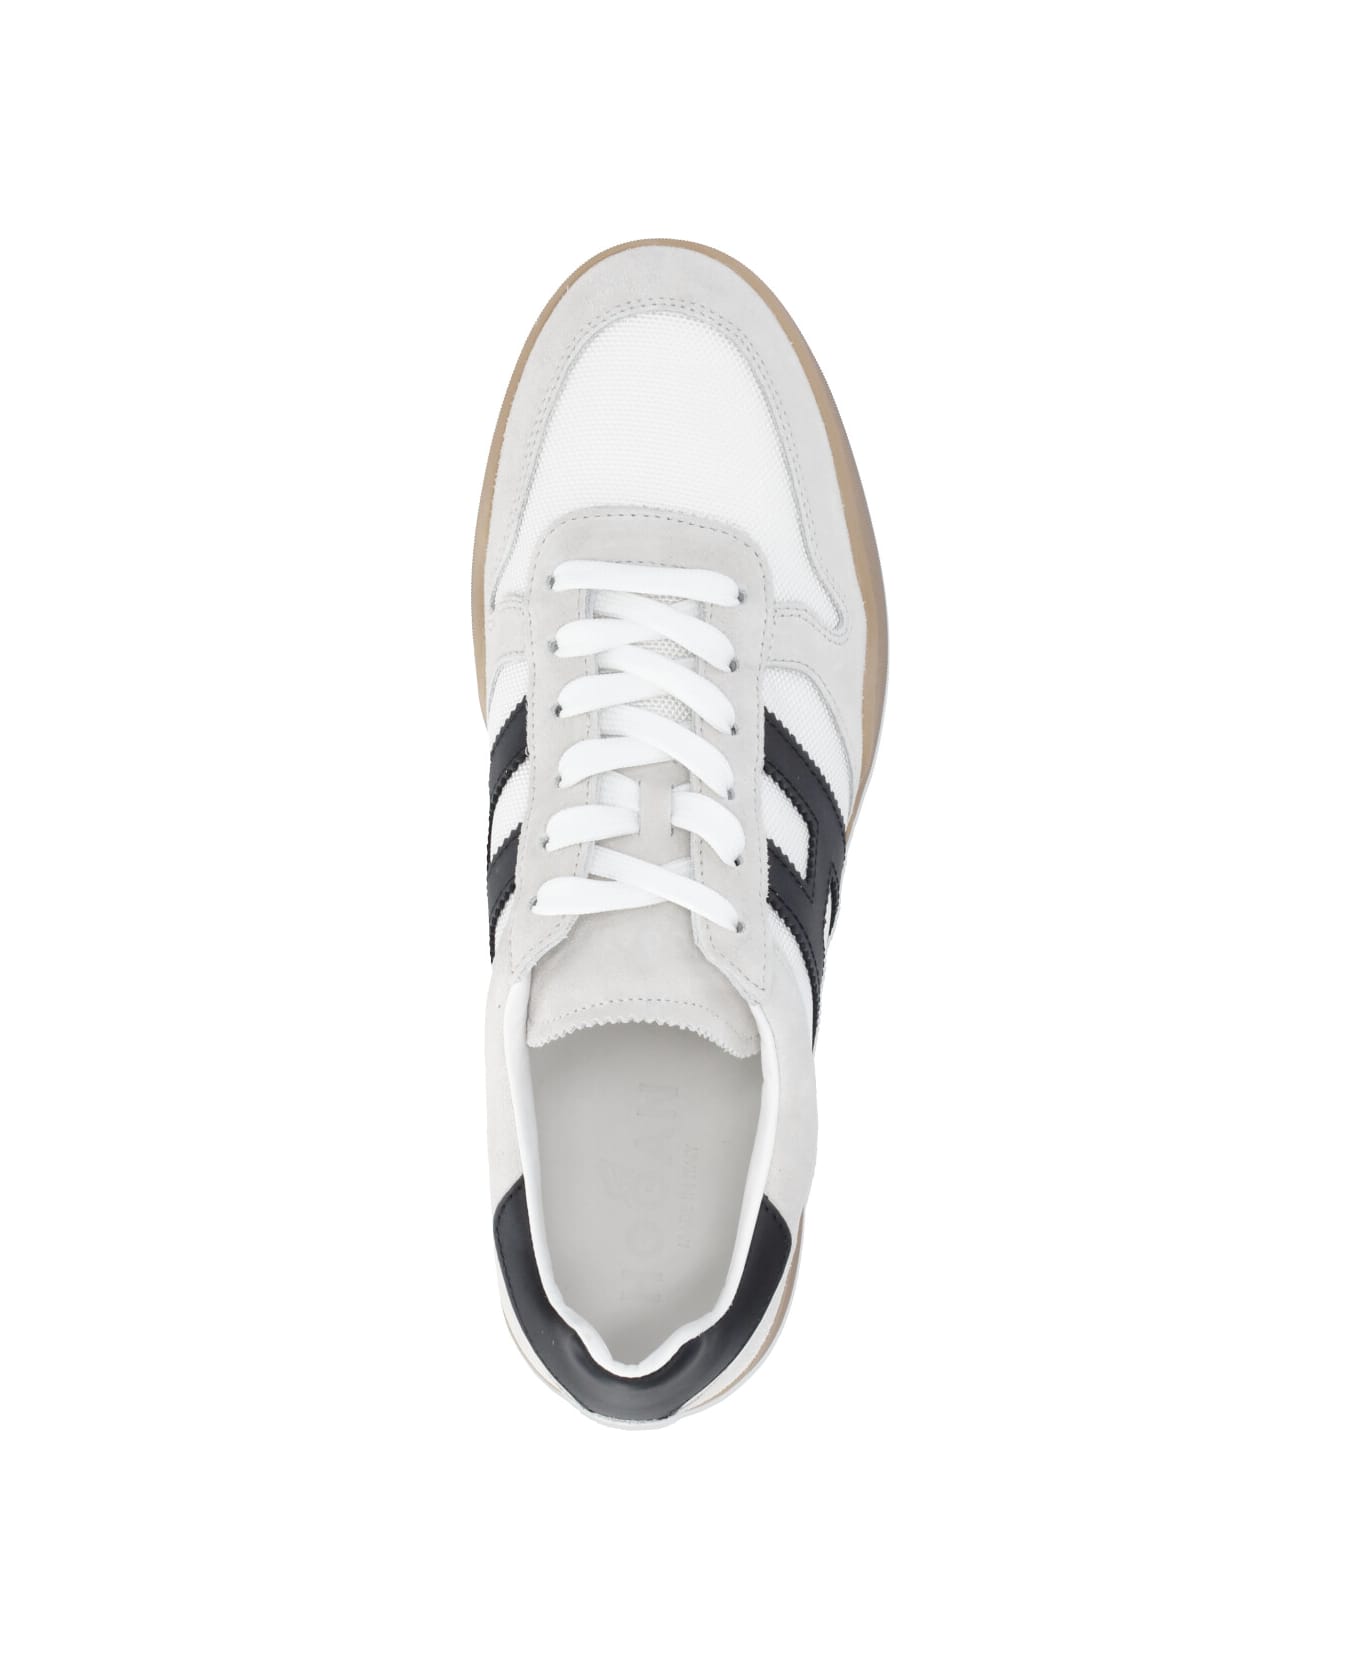 Hogan H357 Sneakers From - White スニーカー